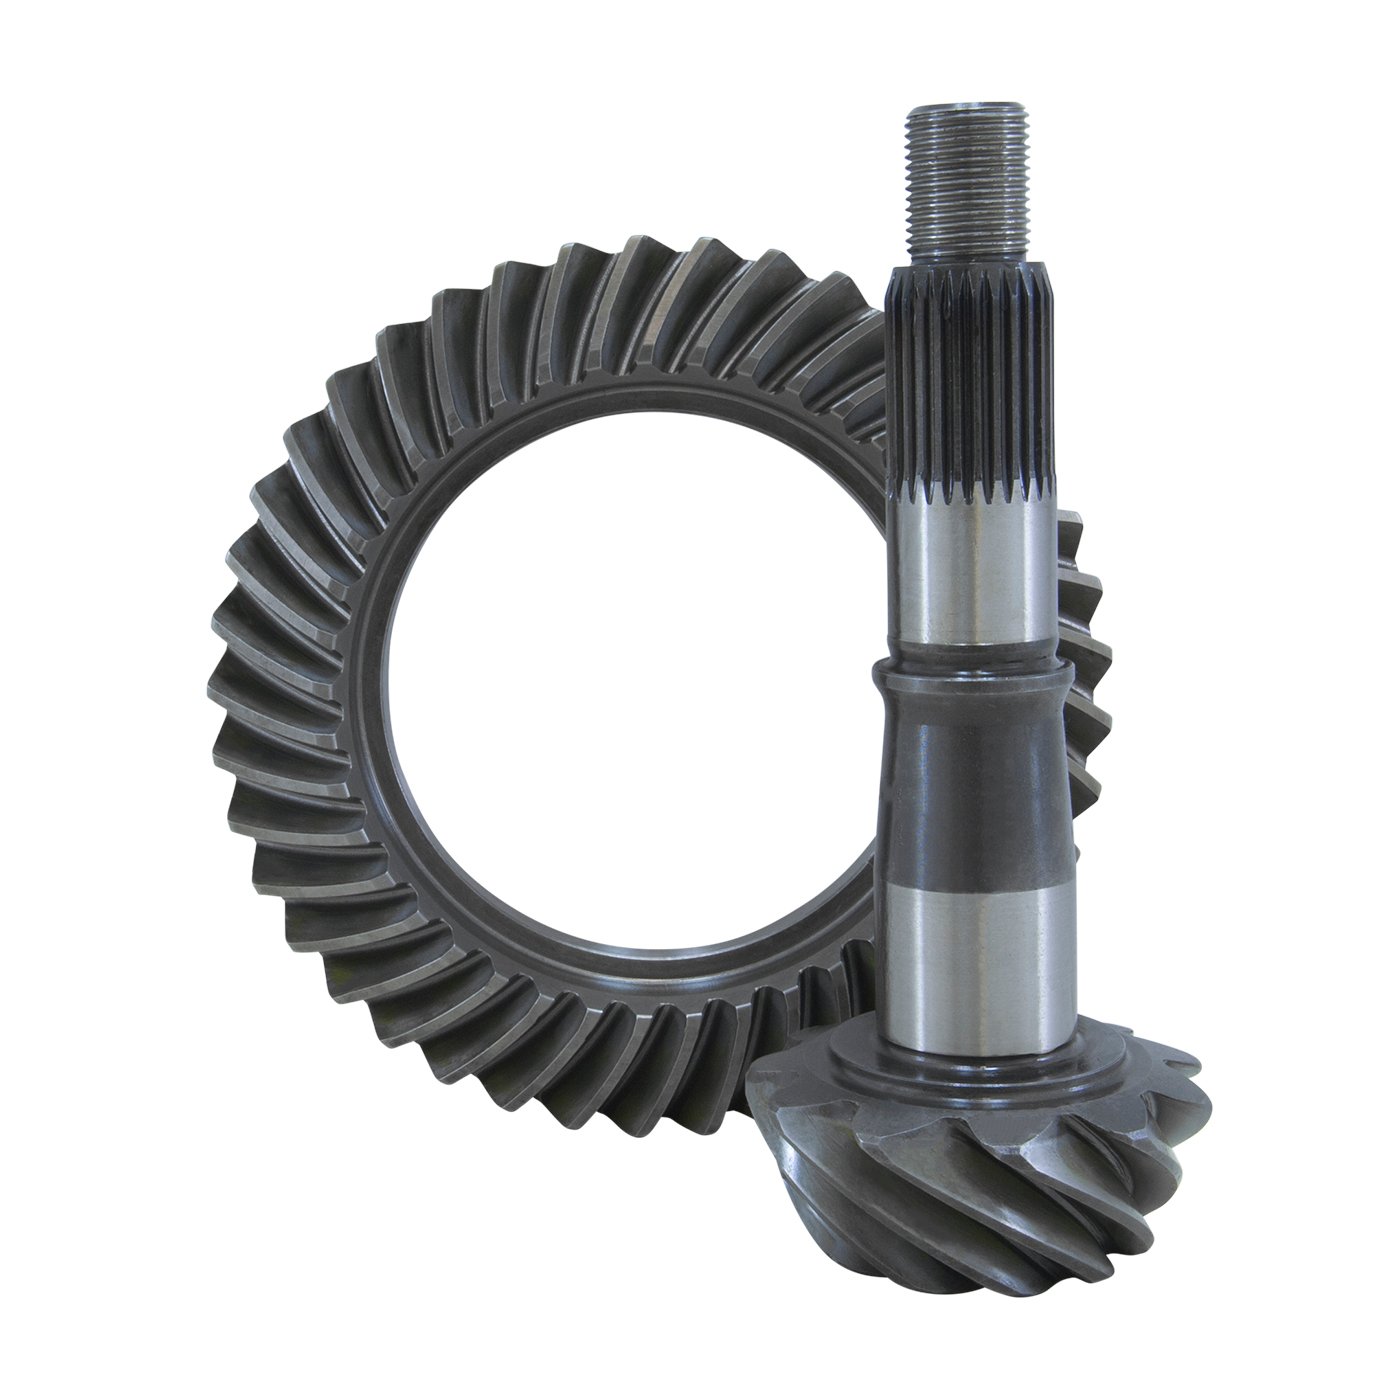 USA Standard 36200 Ring & Pinion in.Thick in. Gear Set, For GM 7.5 in., 4.11 Ratio